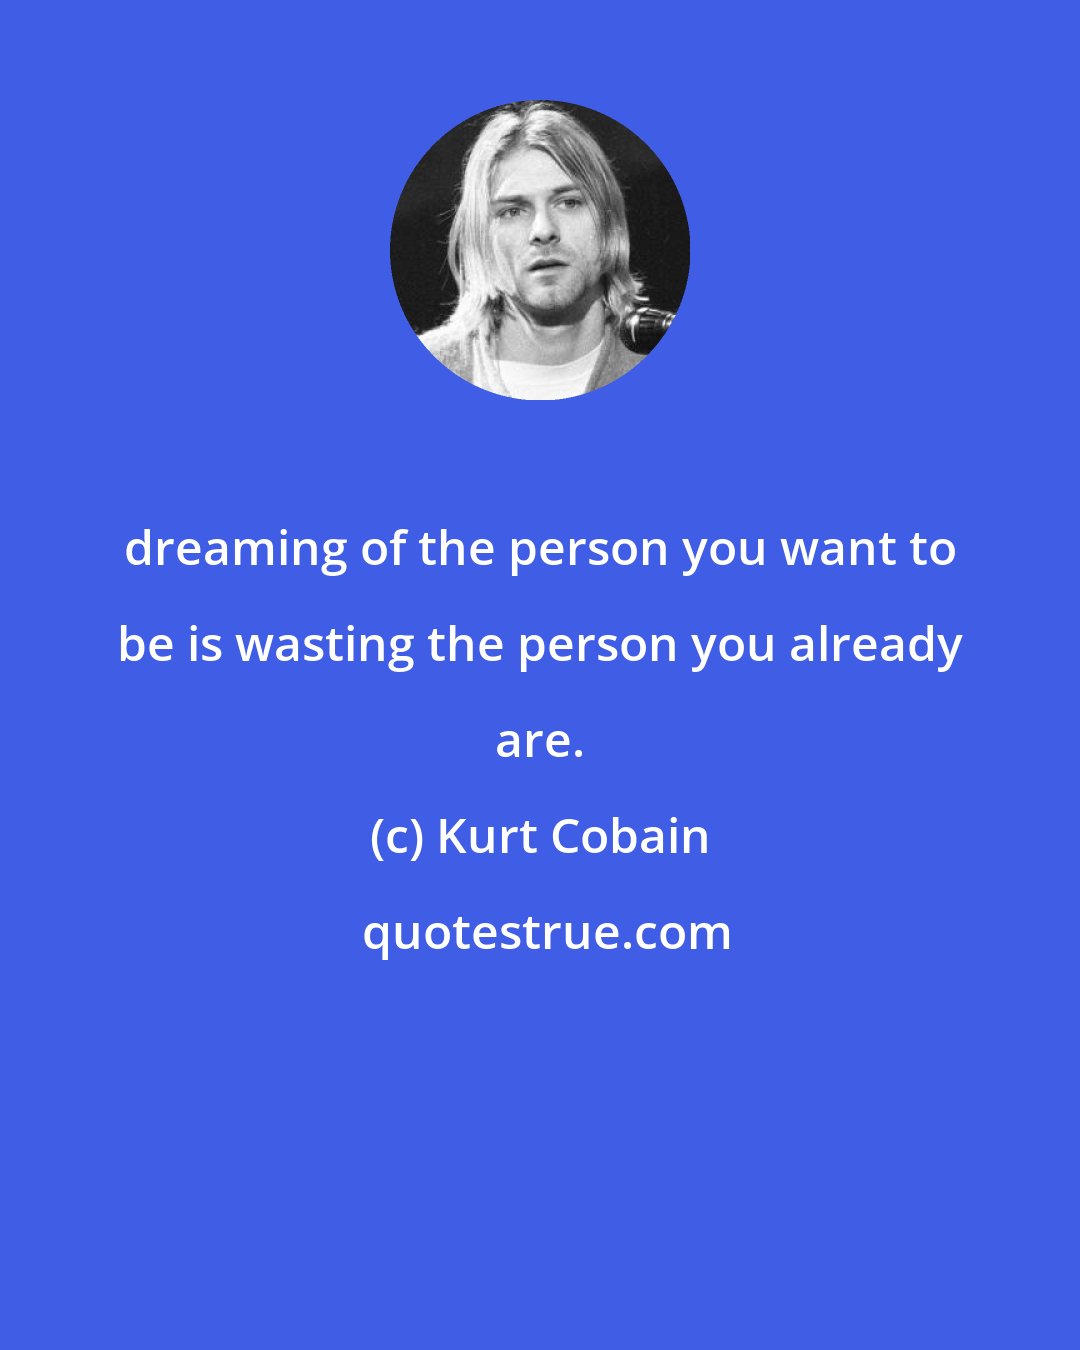 Kurt Cobain: dreaming of the person you want to be is wasting the person you already are.